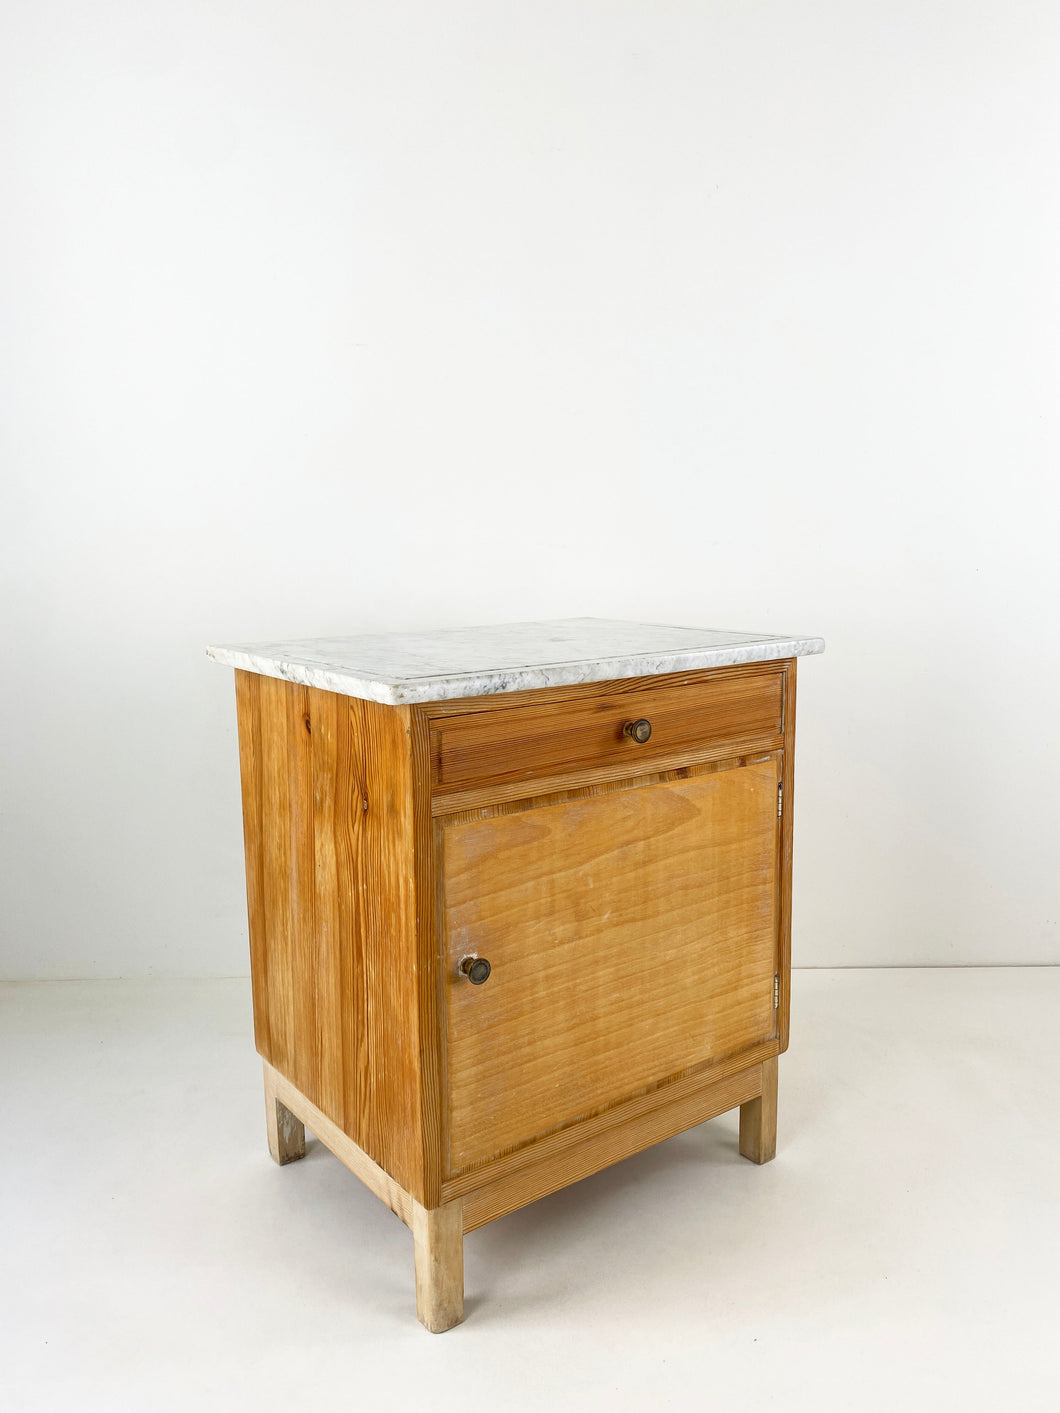 Cabinet with Marble Top